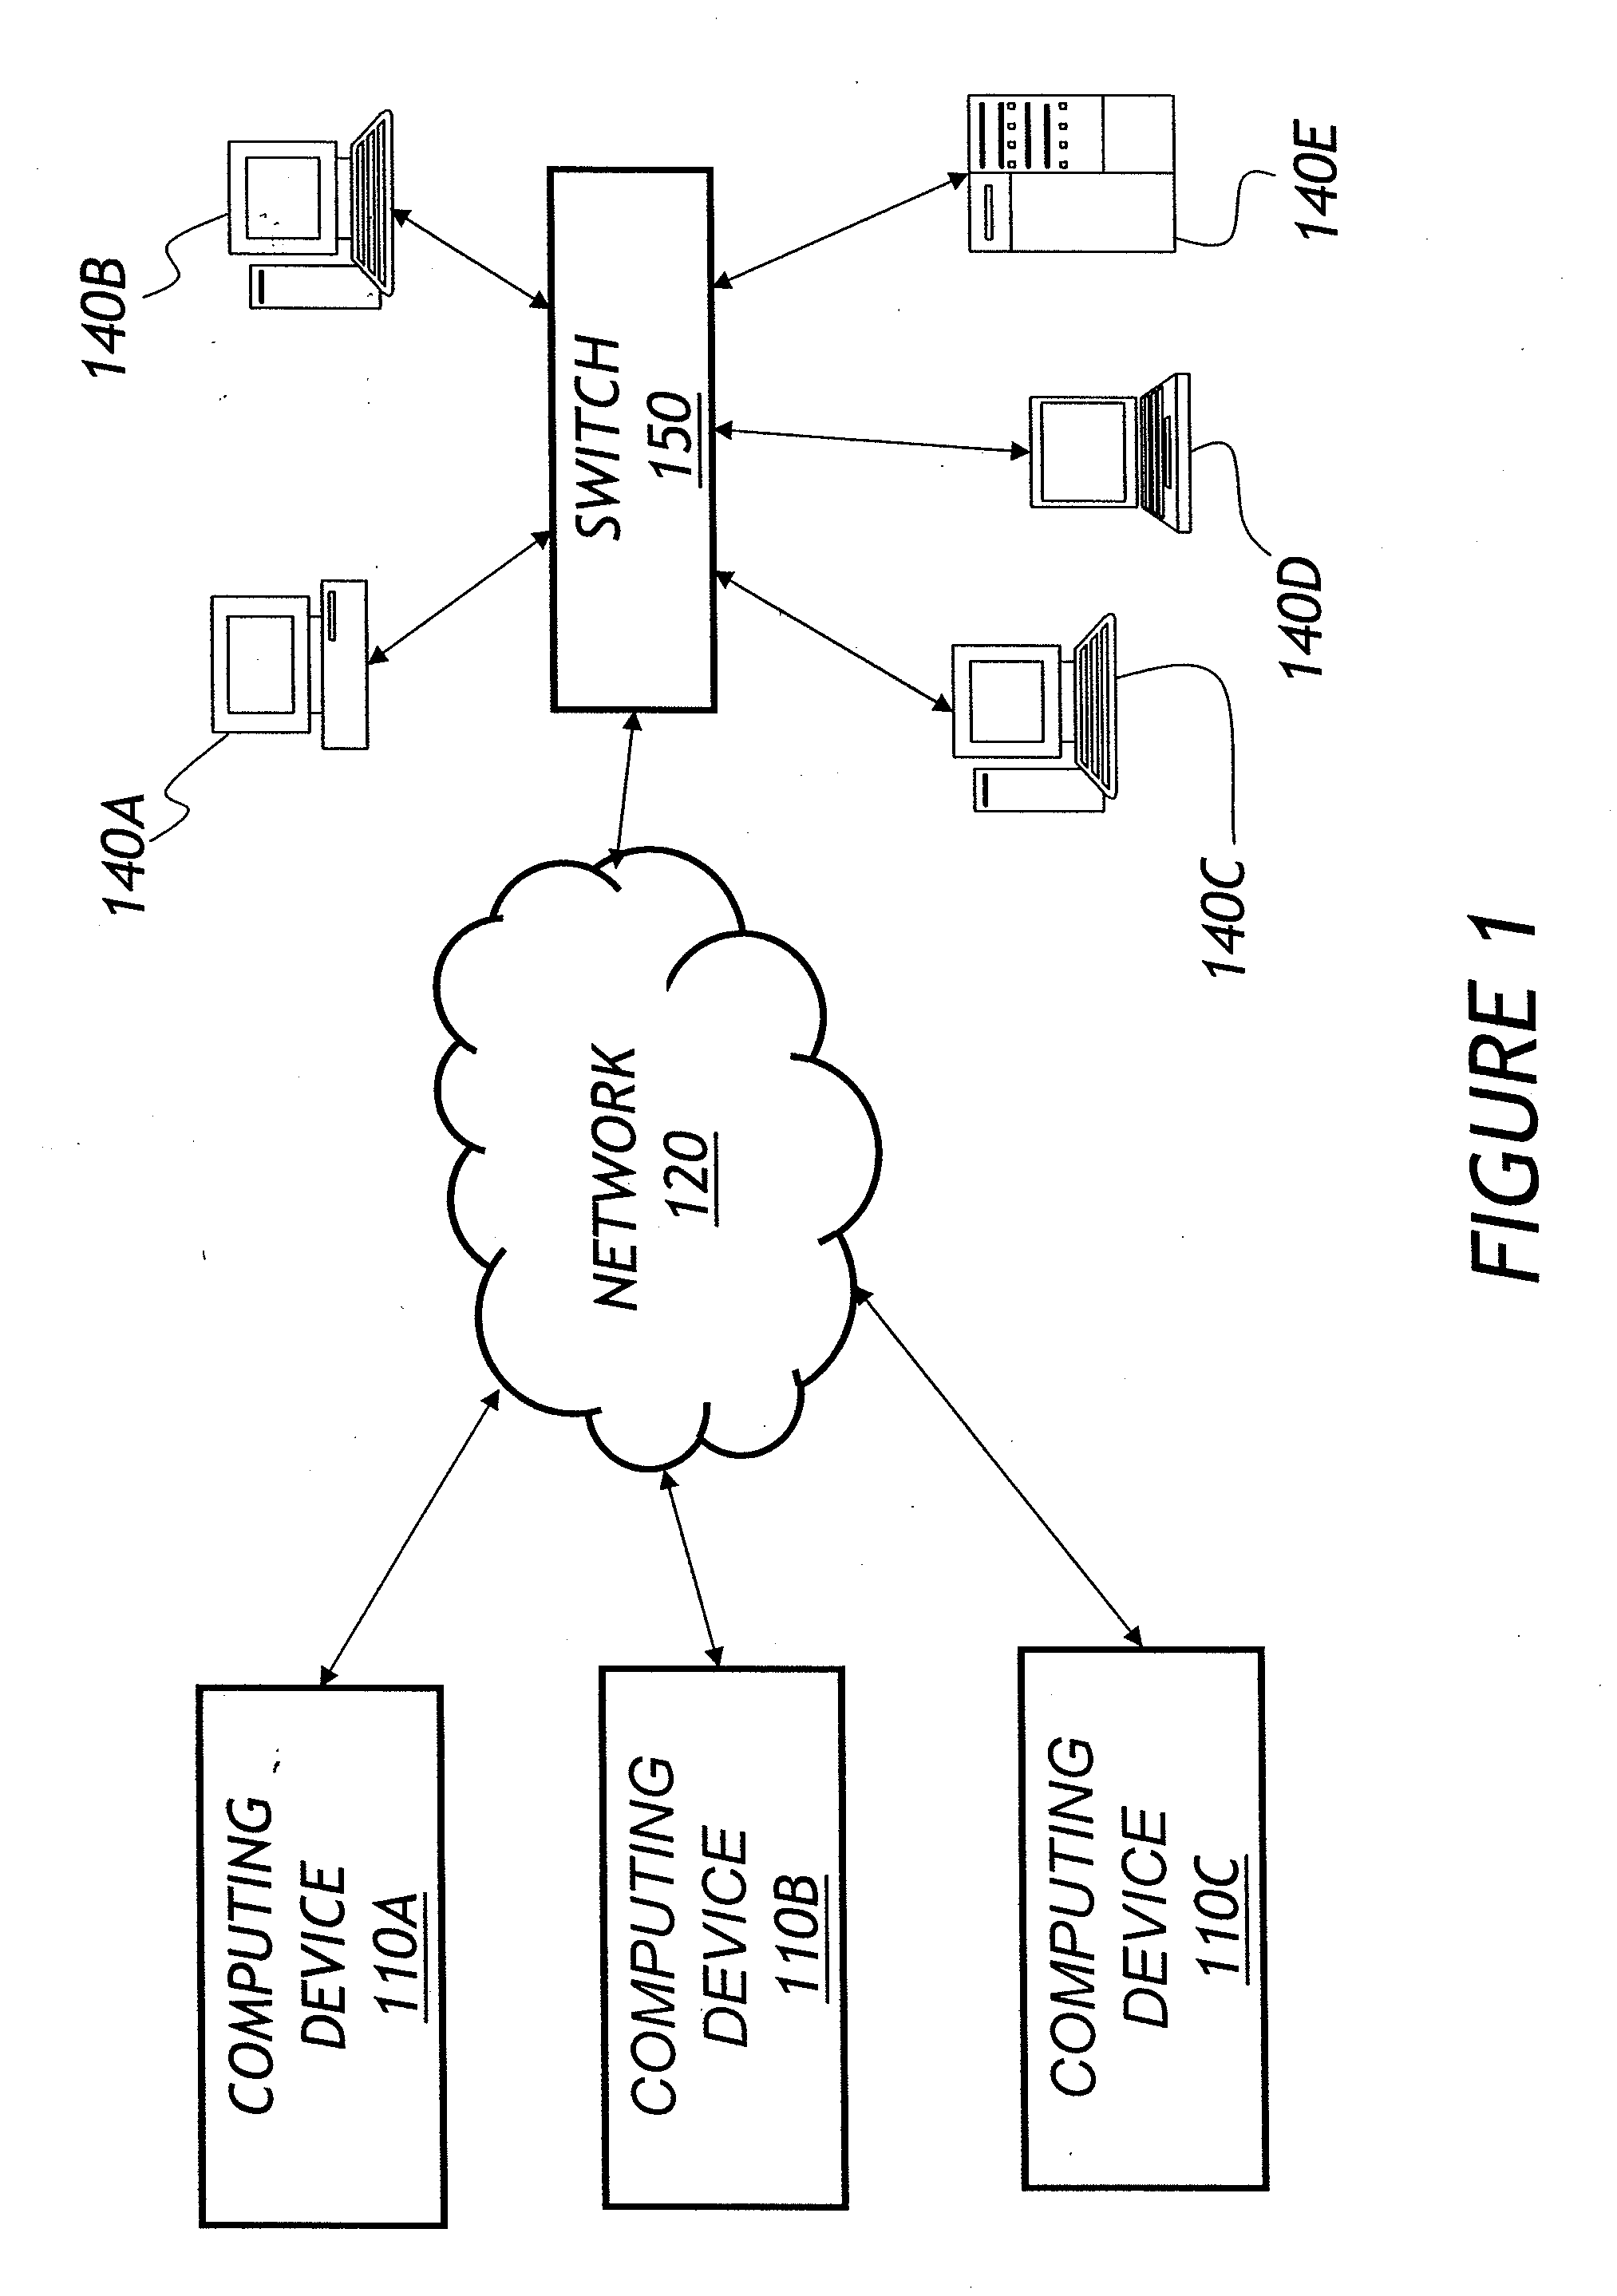 Systems and methods for processing access control lists (ACLS) in network switches using regular expression matching logic